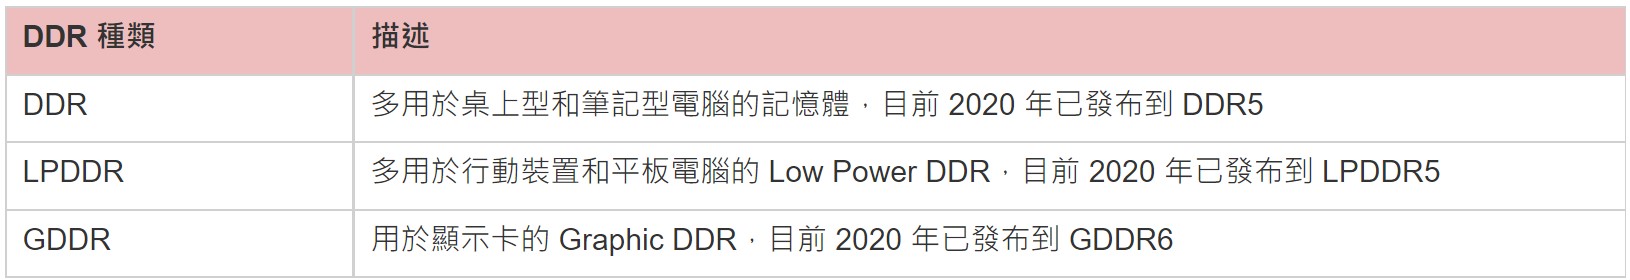 3 kinds of DDR